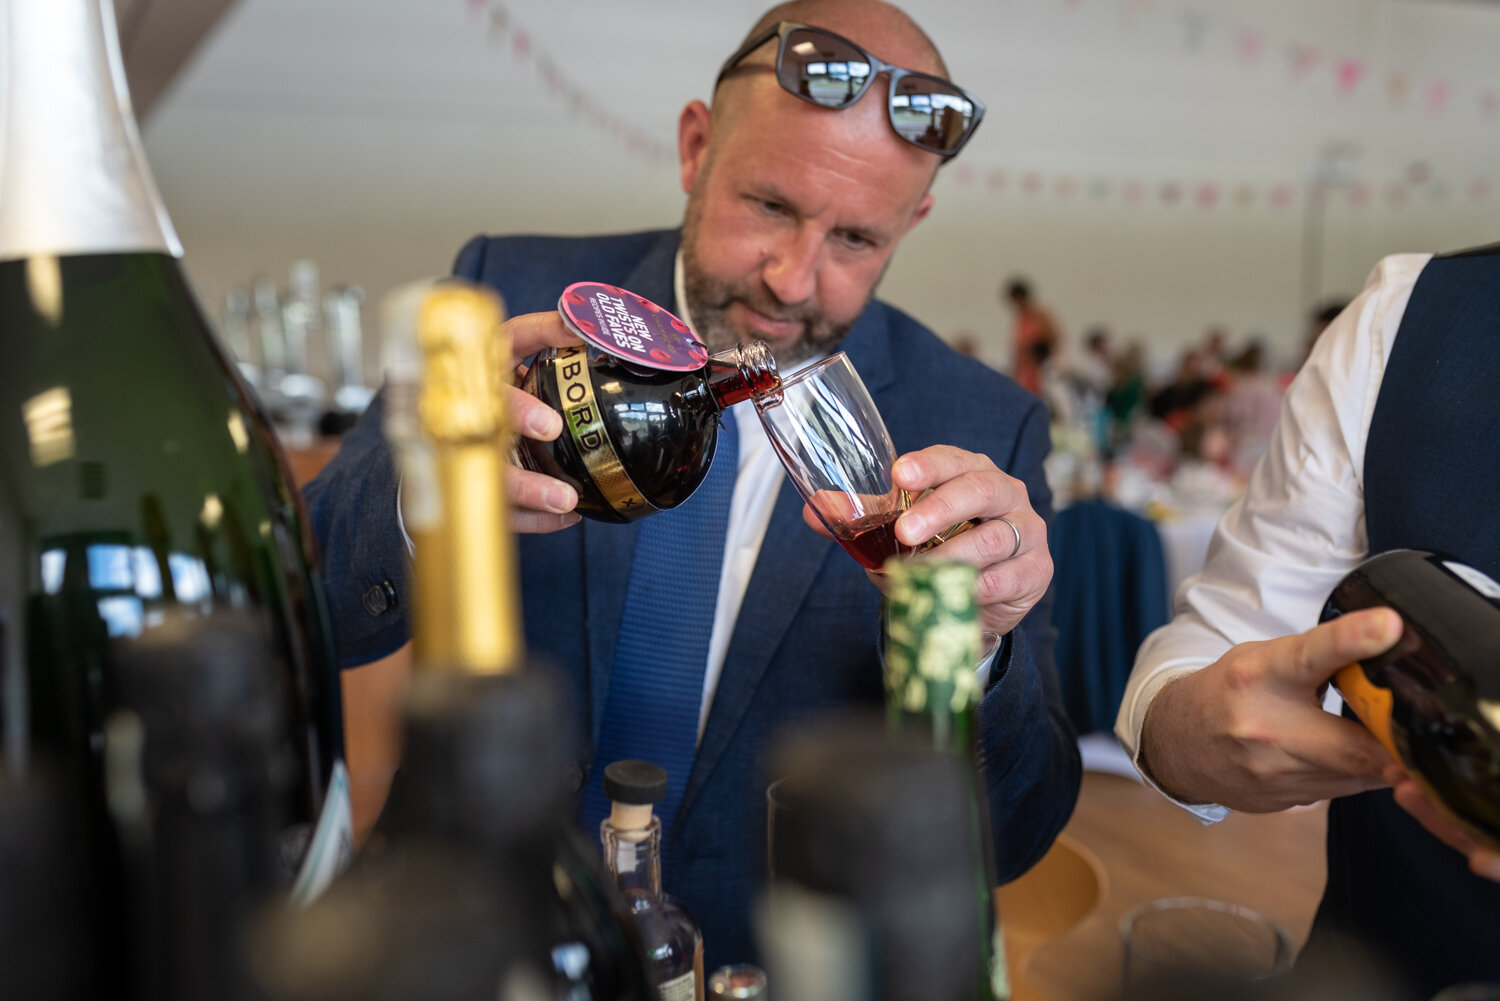 Wedding guest pouring a drink